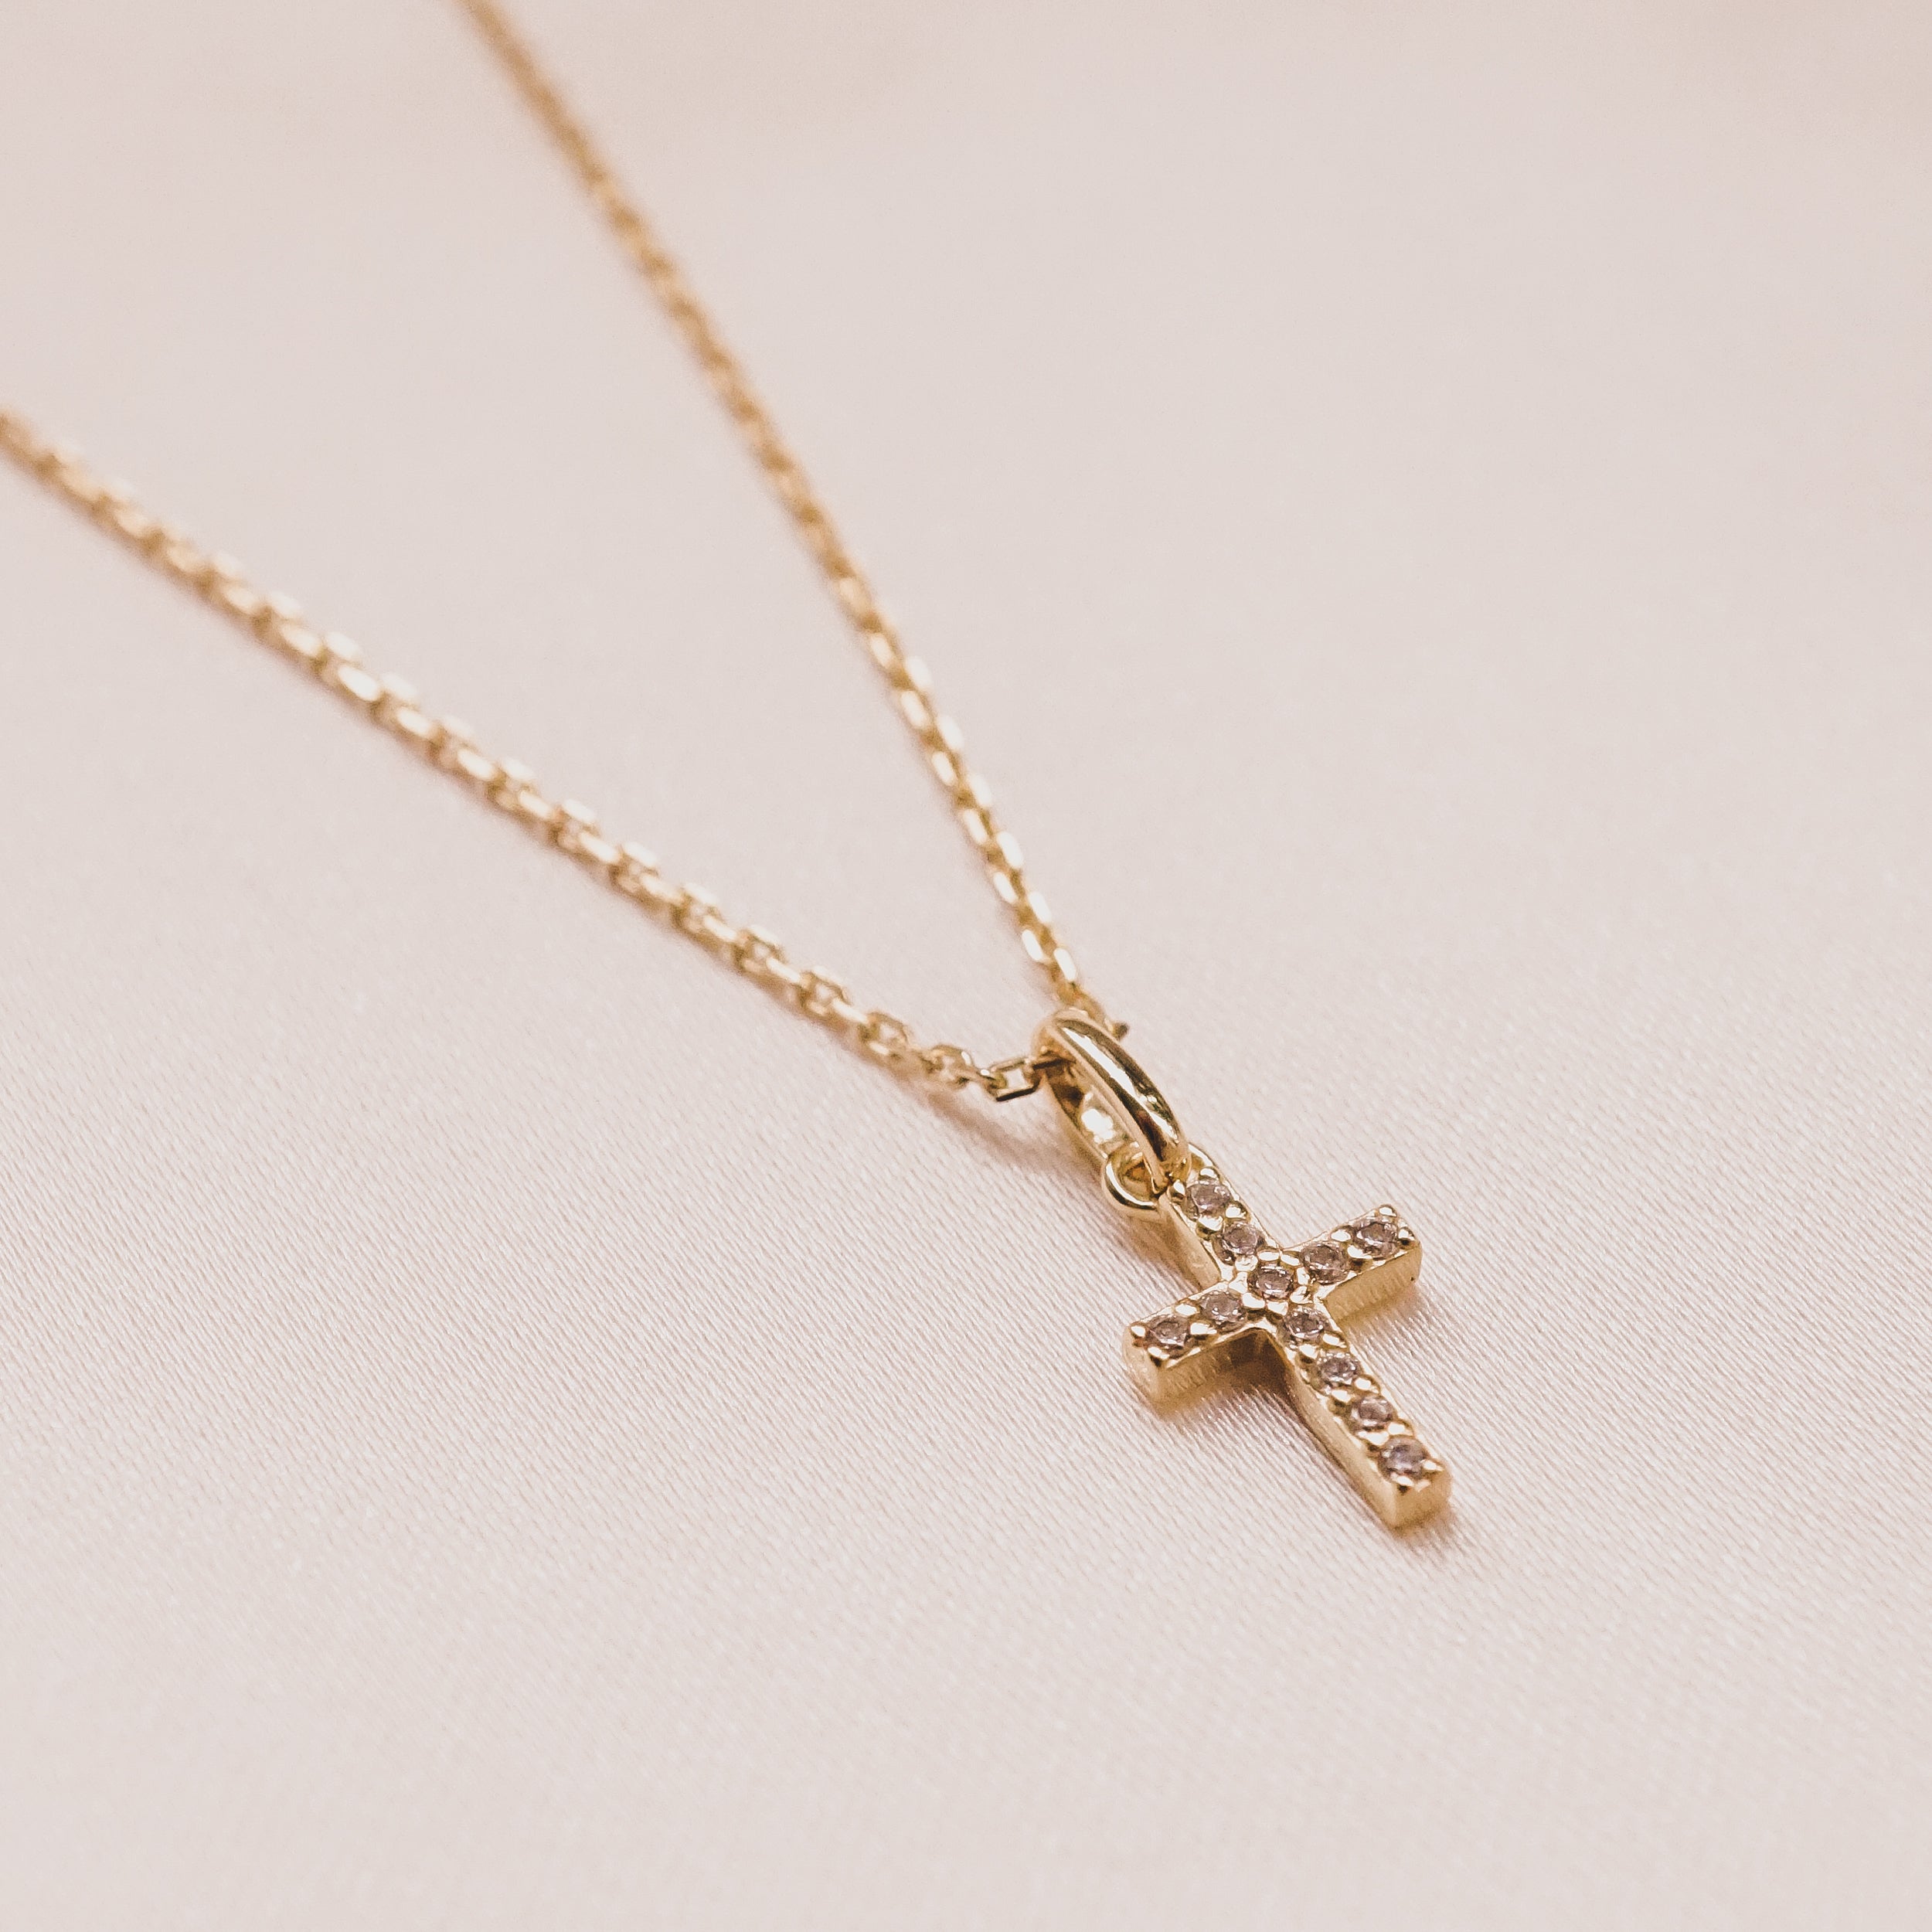 The Perfect Dainty Cross Necklace